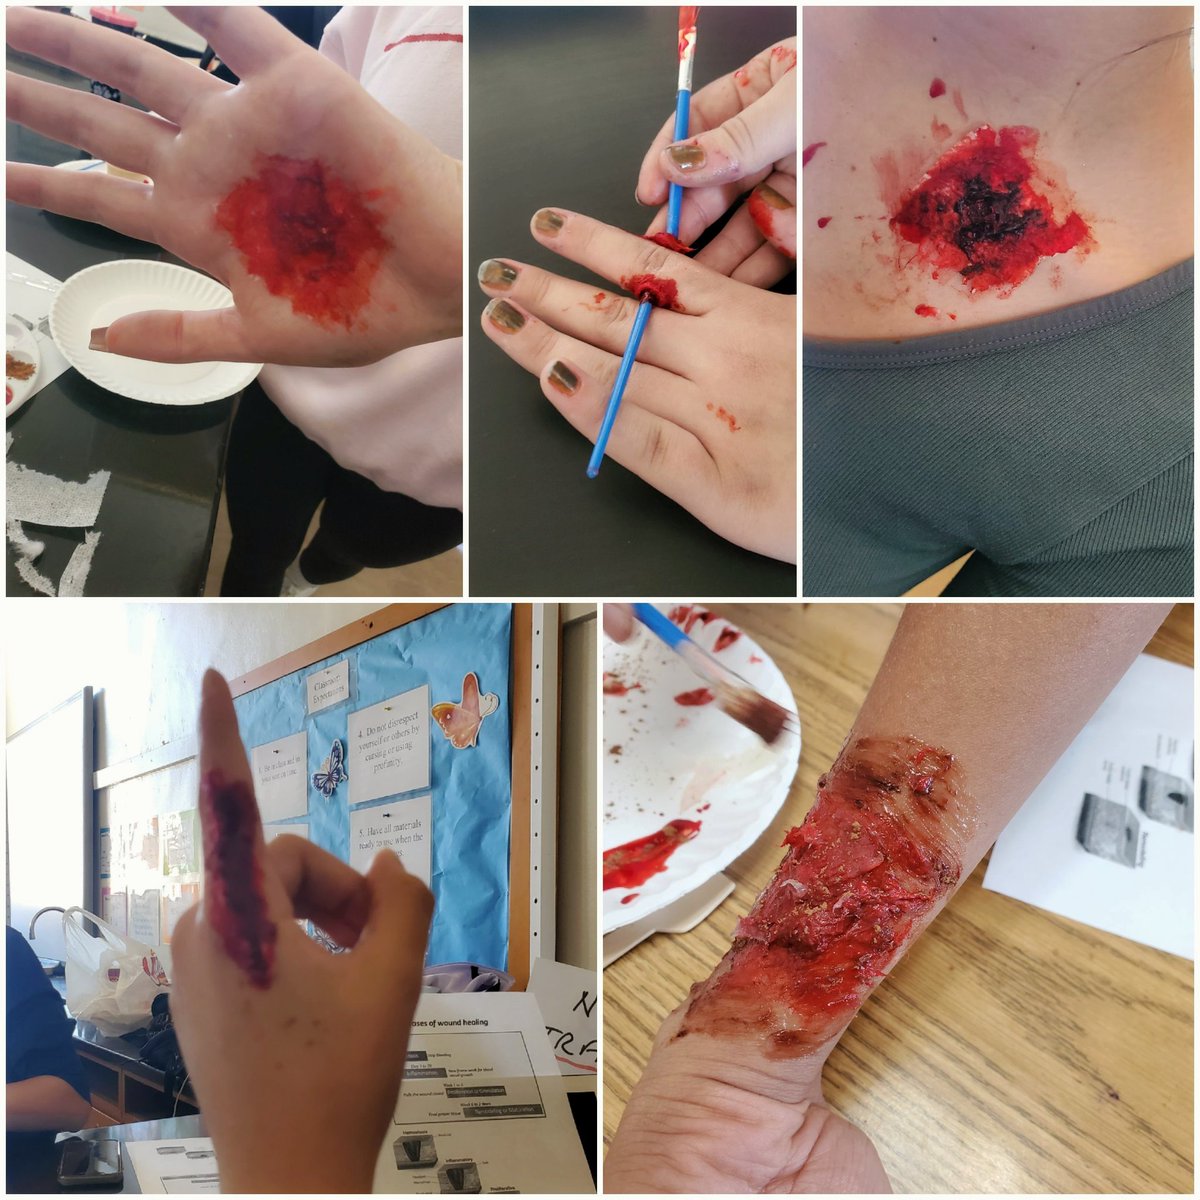 Learning about wounds and healing by creating models on themselves. I absolutely love my students. They're amazing and so creative!

#teachinganatomy #anatomyclass #Integumentarysystem